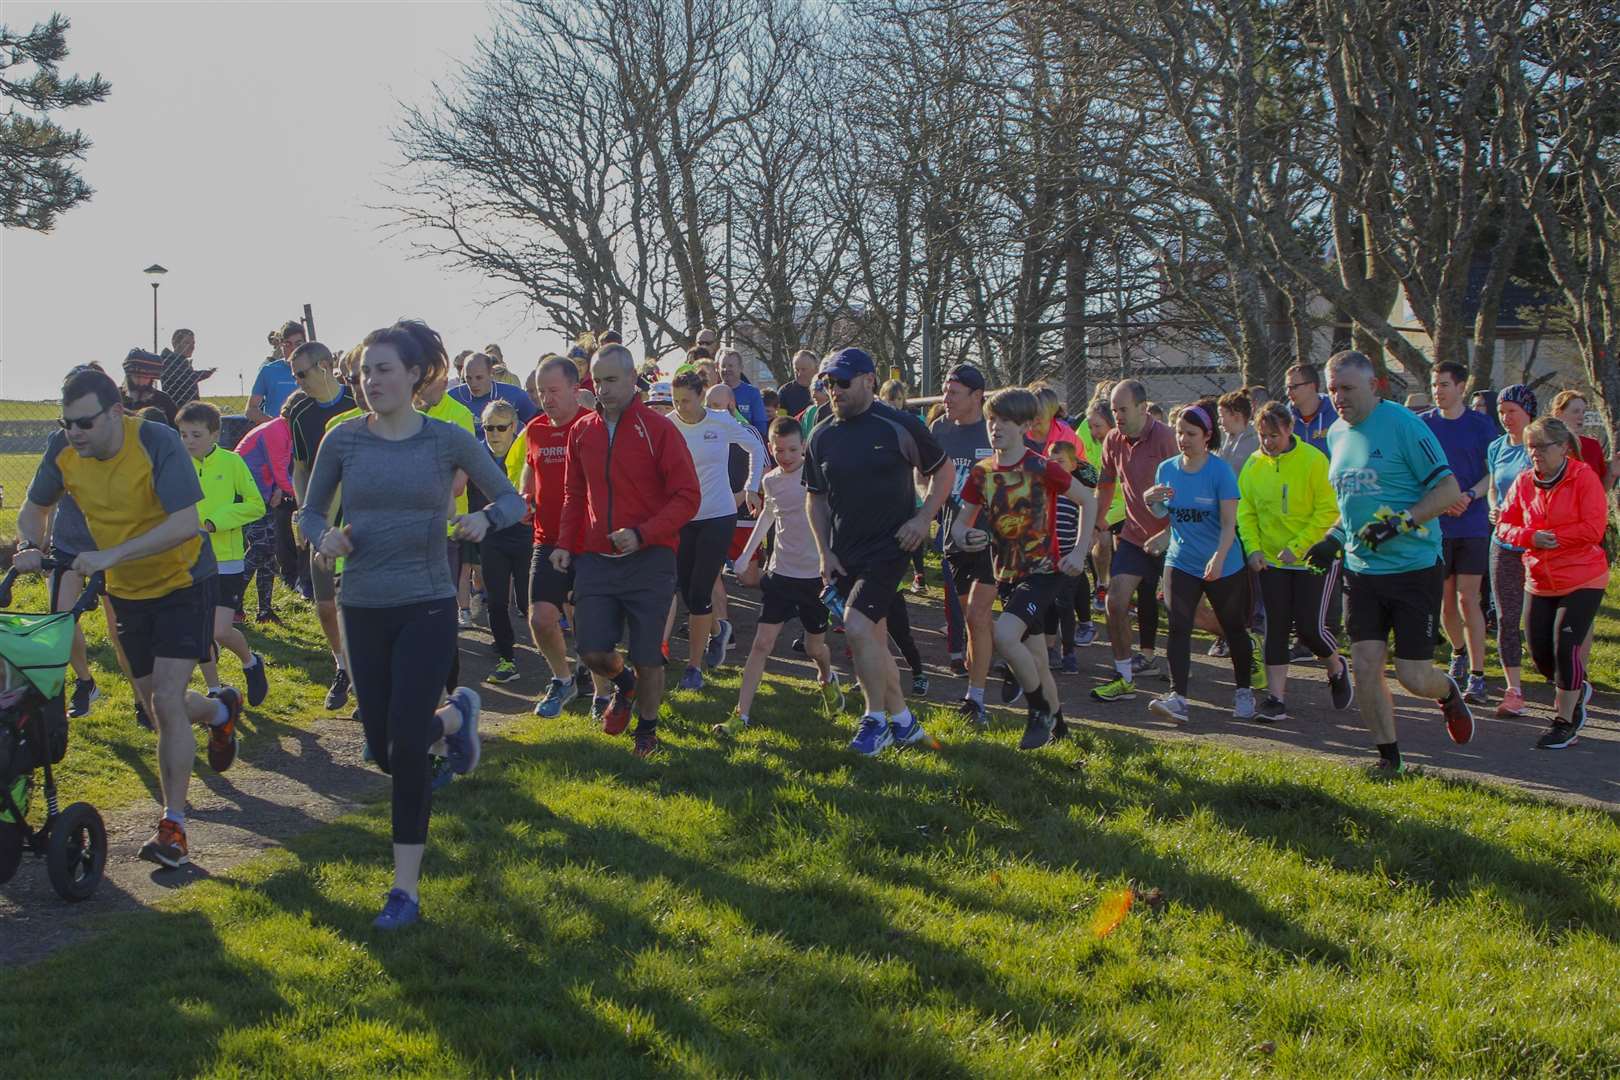 Just some of the 95 runners who gathered in Thurso on April 13 to celebrate the anniversary of Thurso Park run.